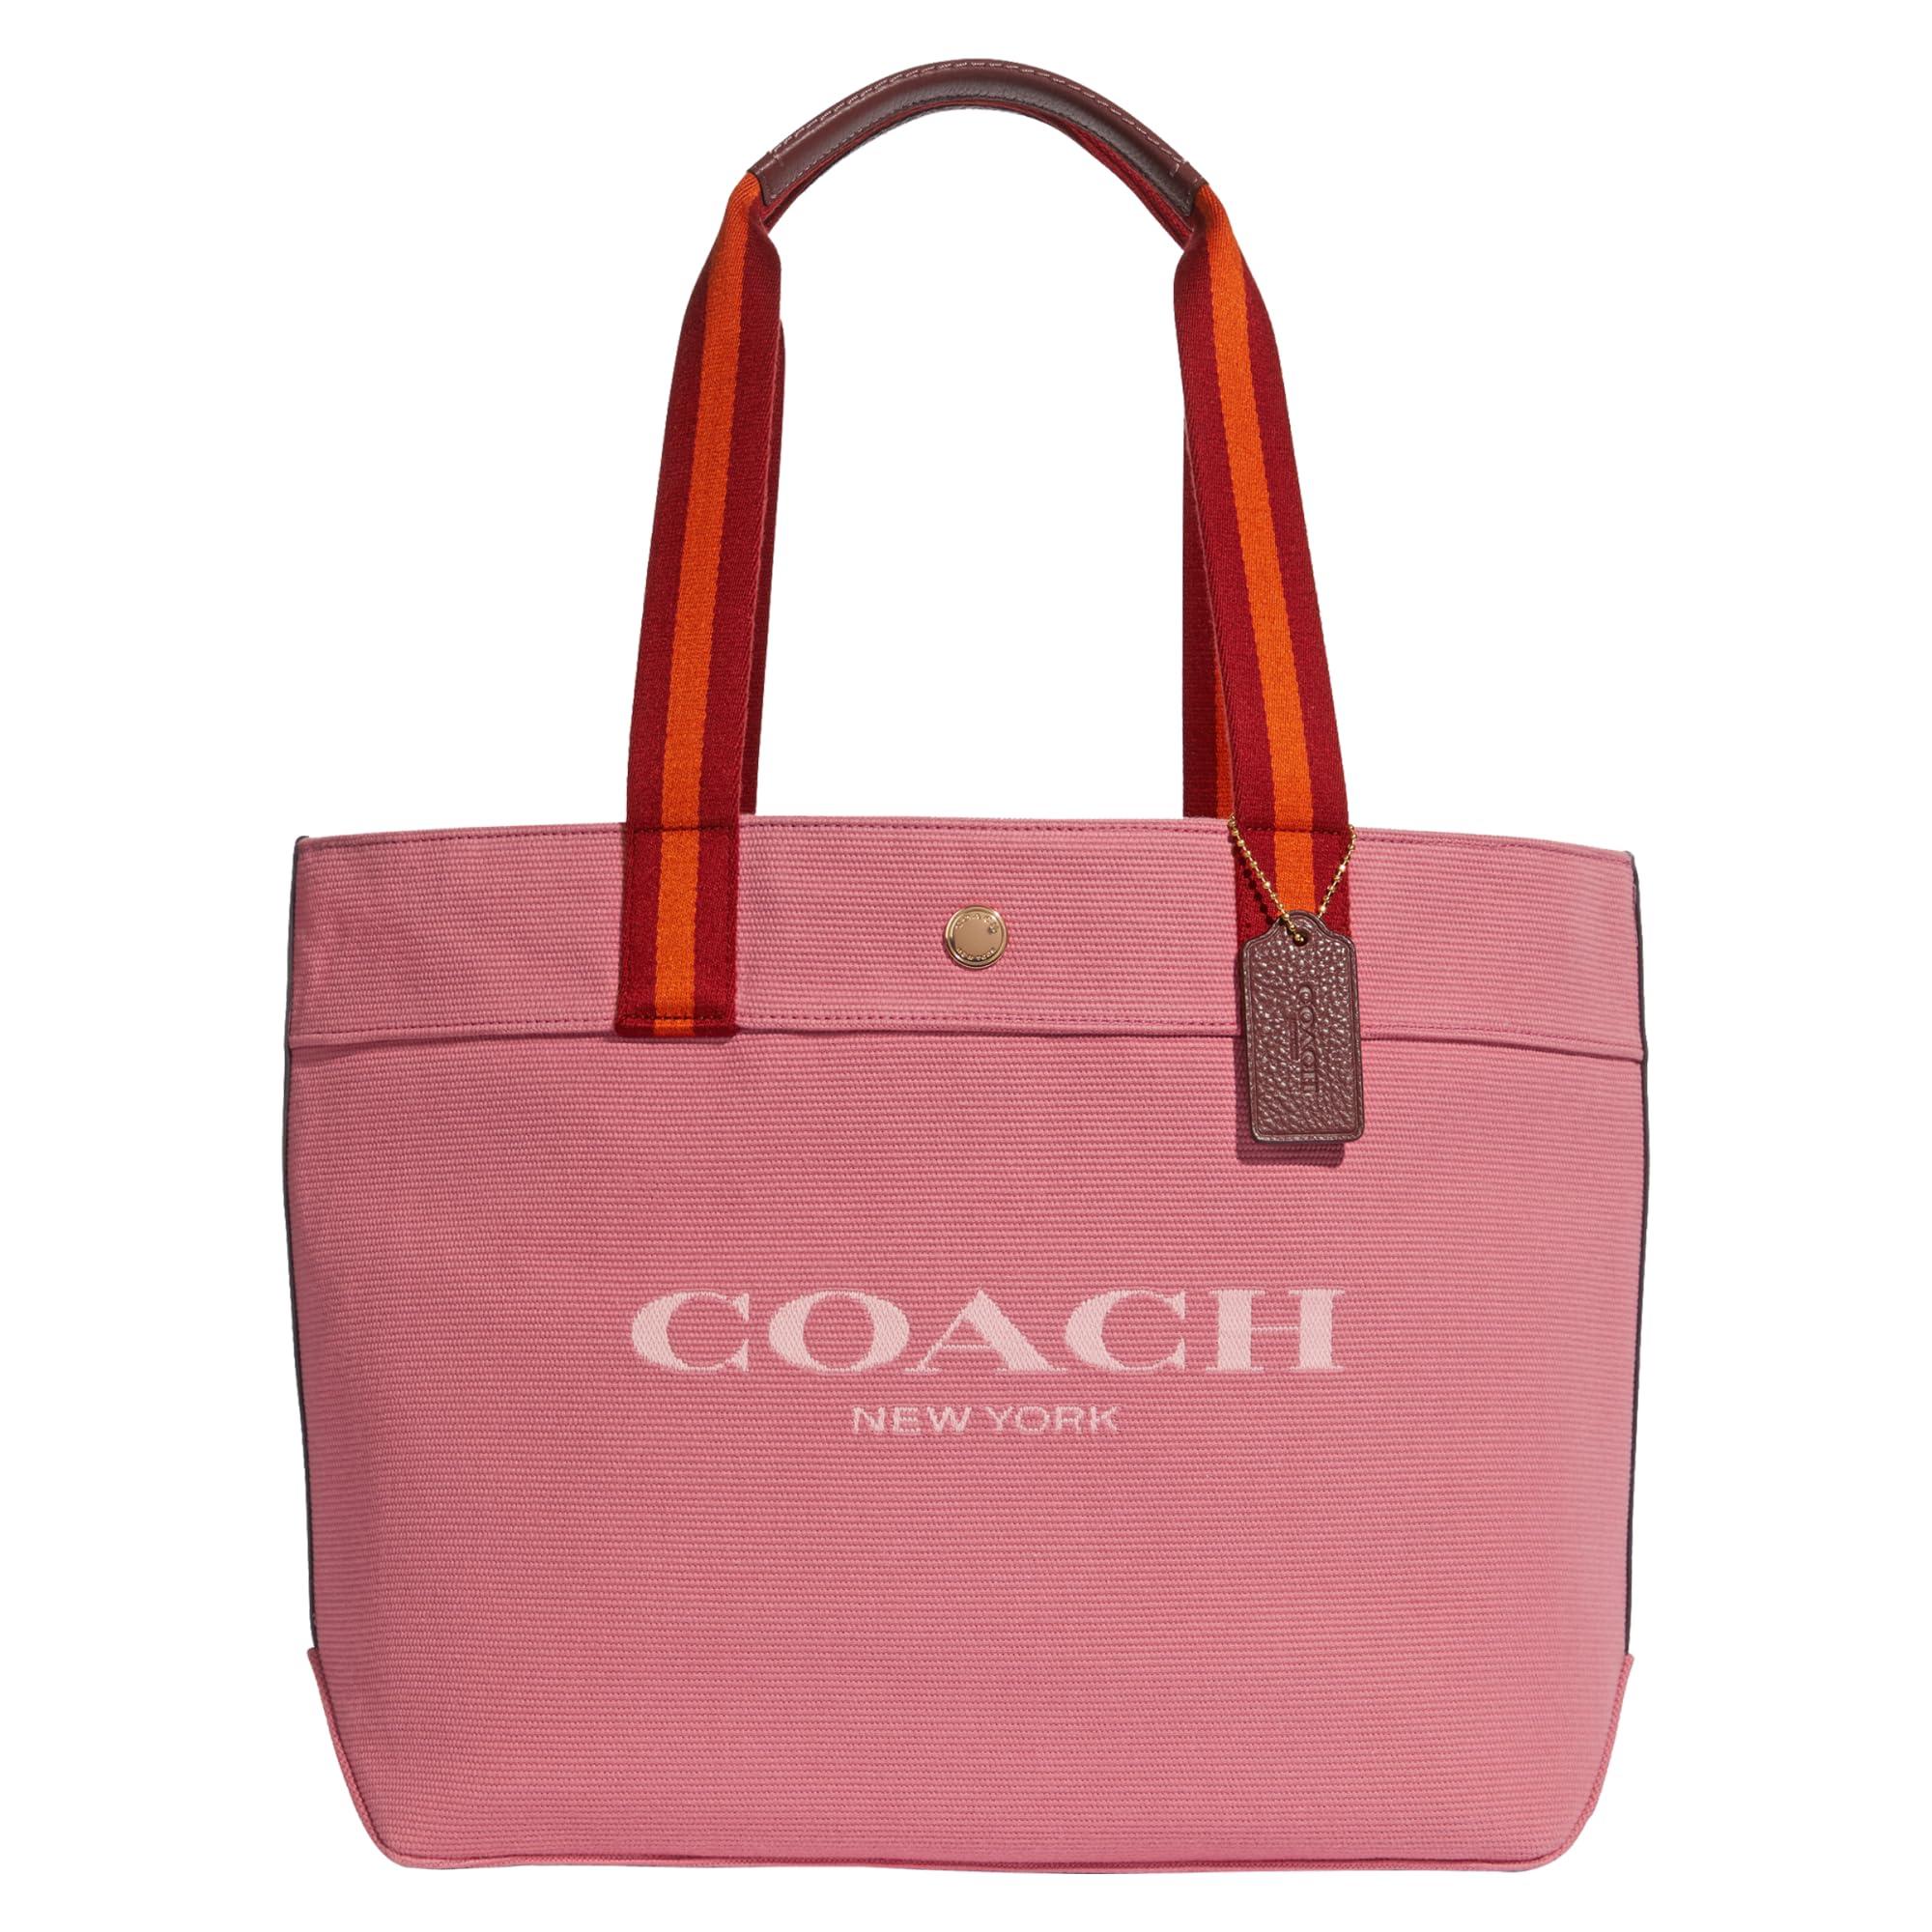 COACH Canvas Tote in Red | Lyst